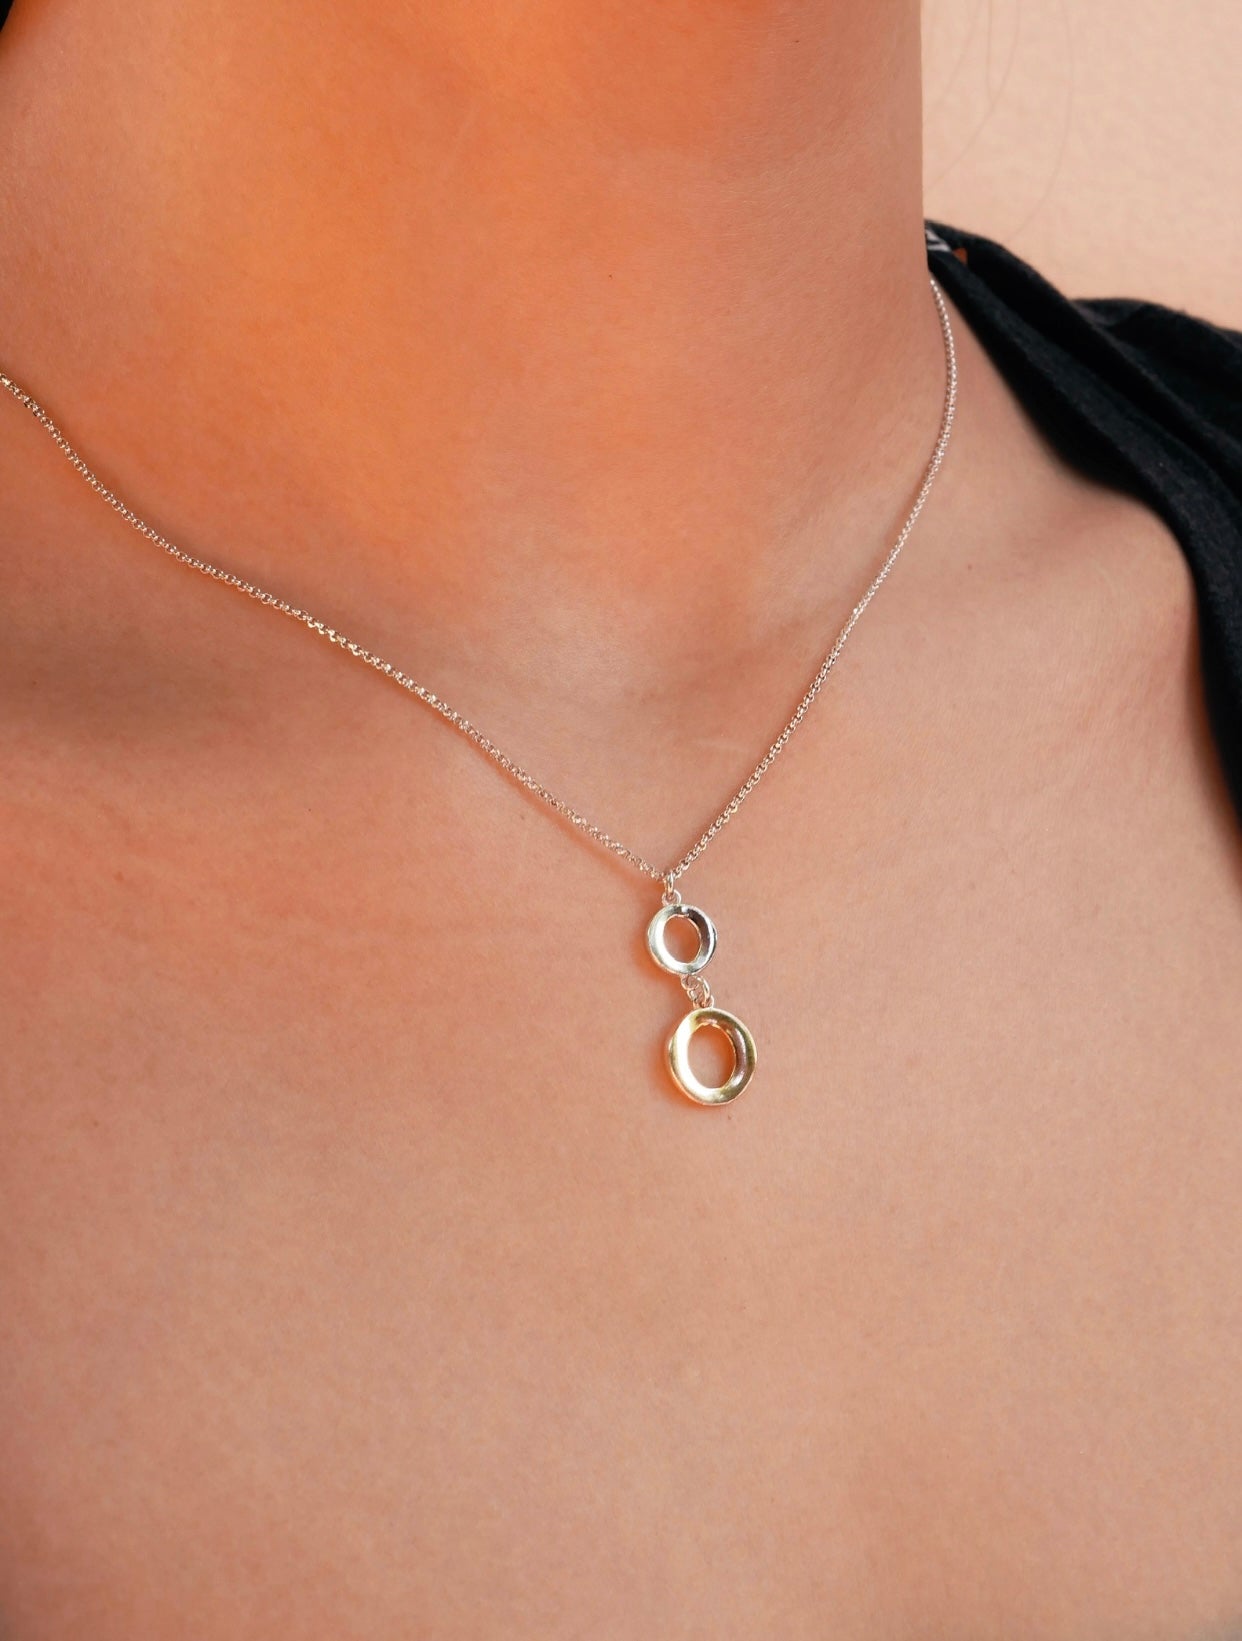 DOUBLE HOOP Necklace Silver & Rose Gold